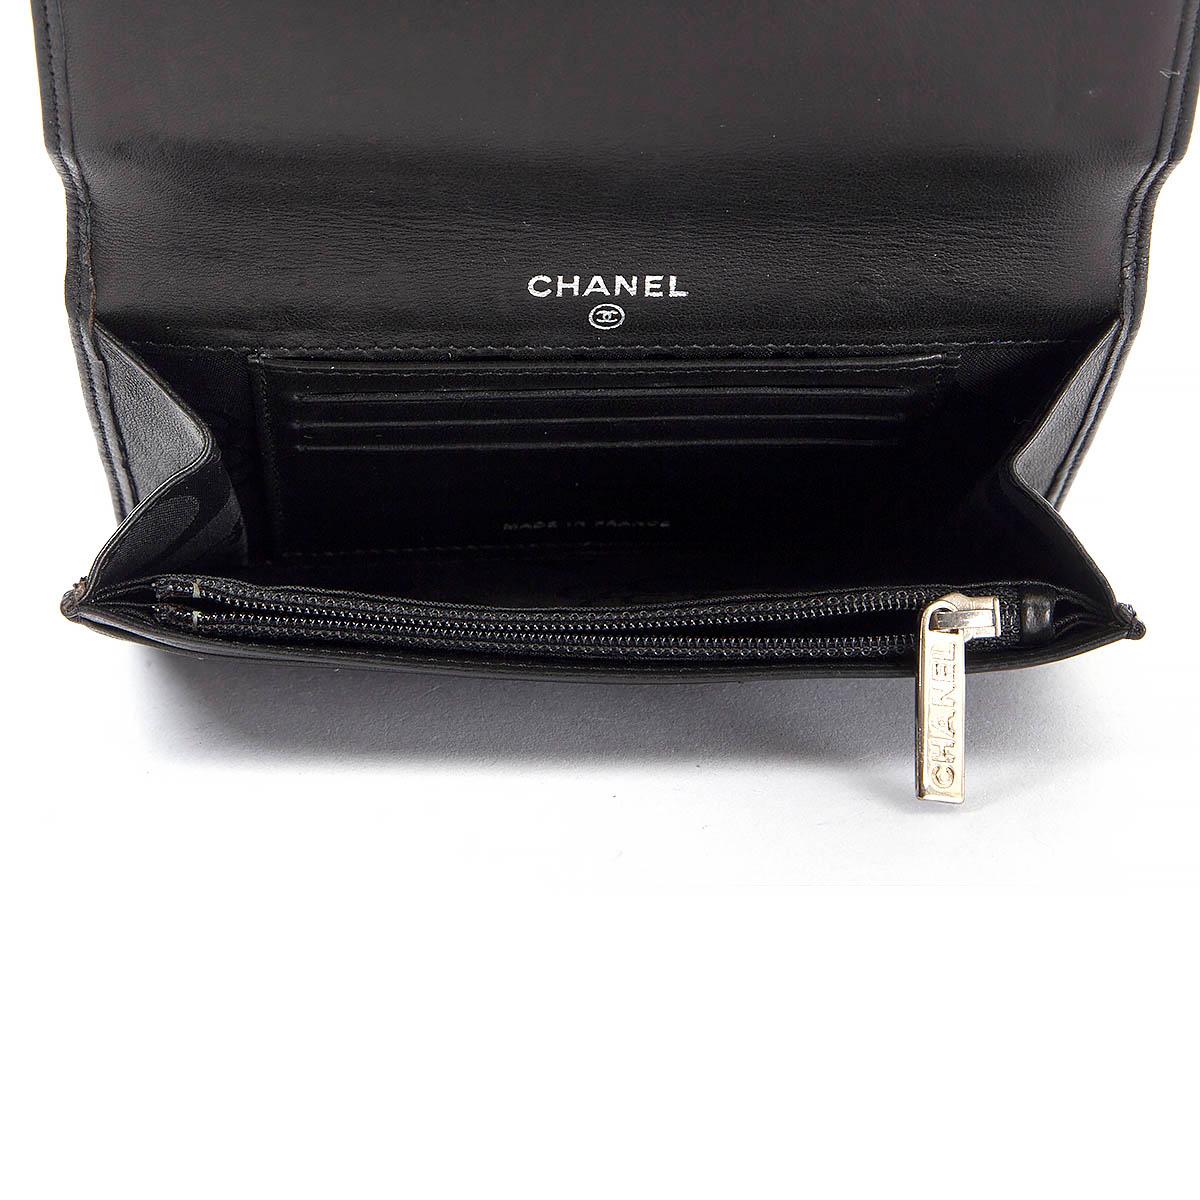 CHANEL black quilted leather Wallet 2